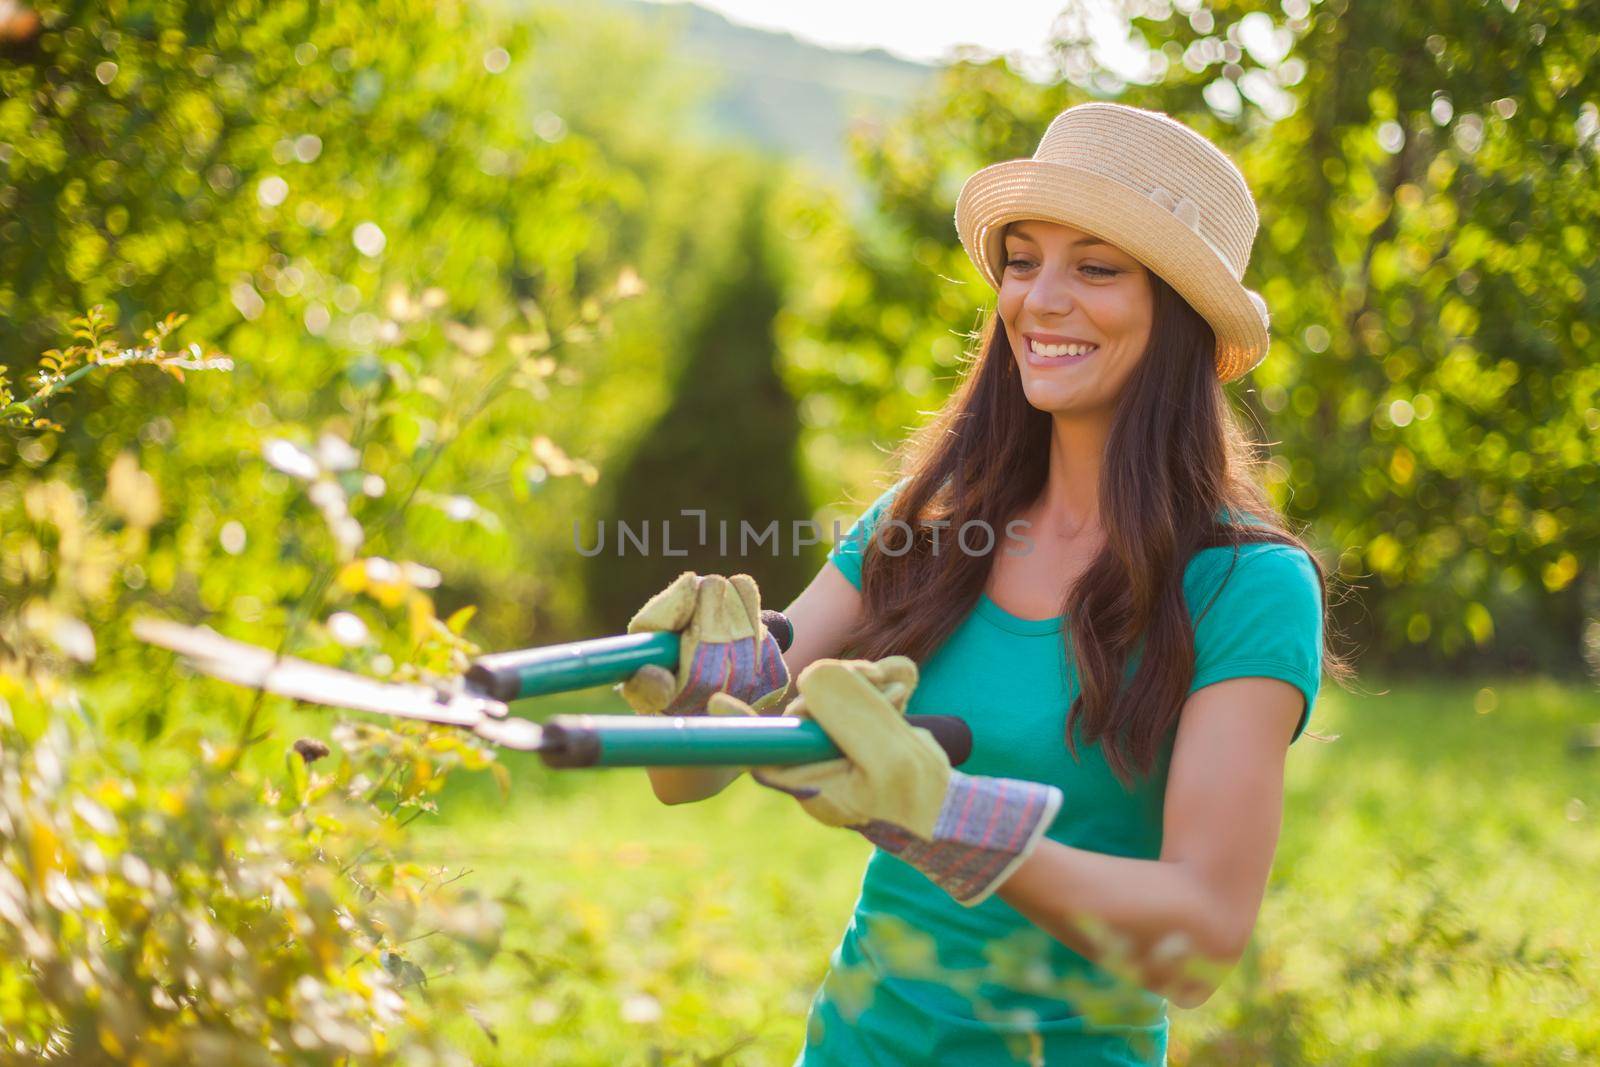 Young woman in her garden. She is pruning bushes.